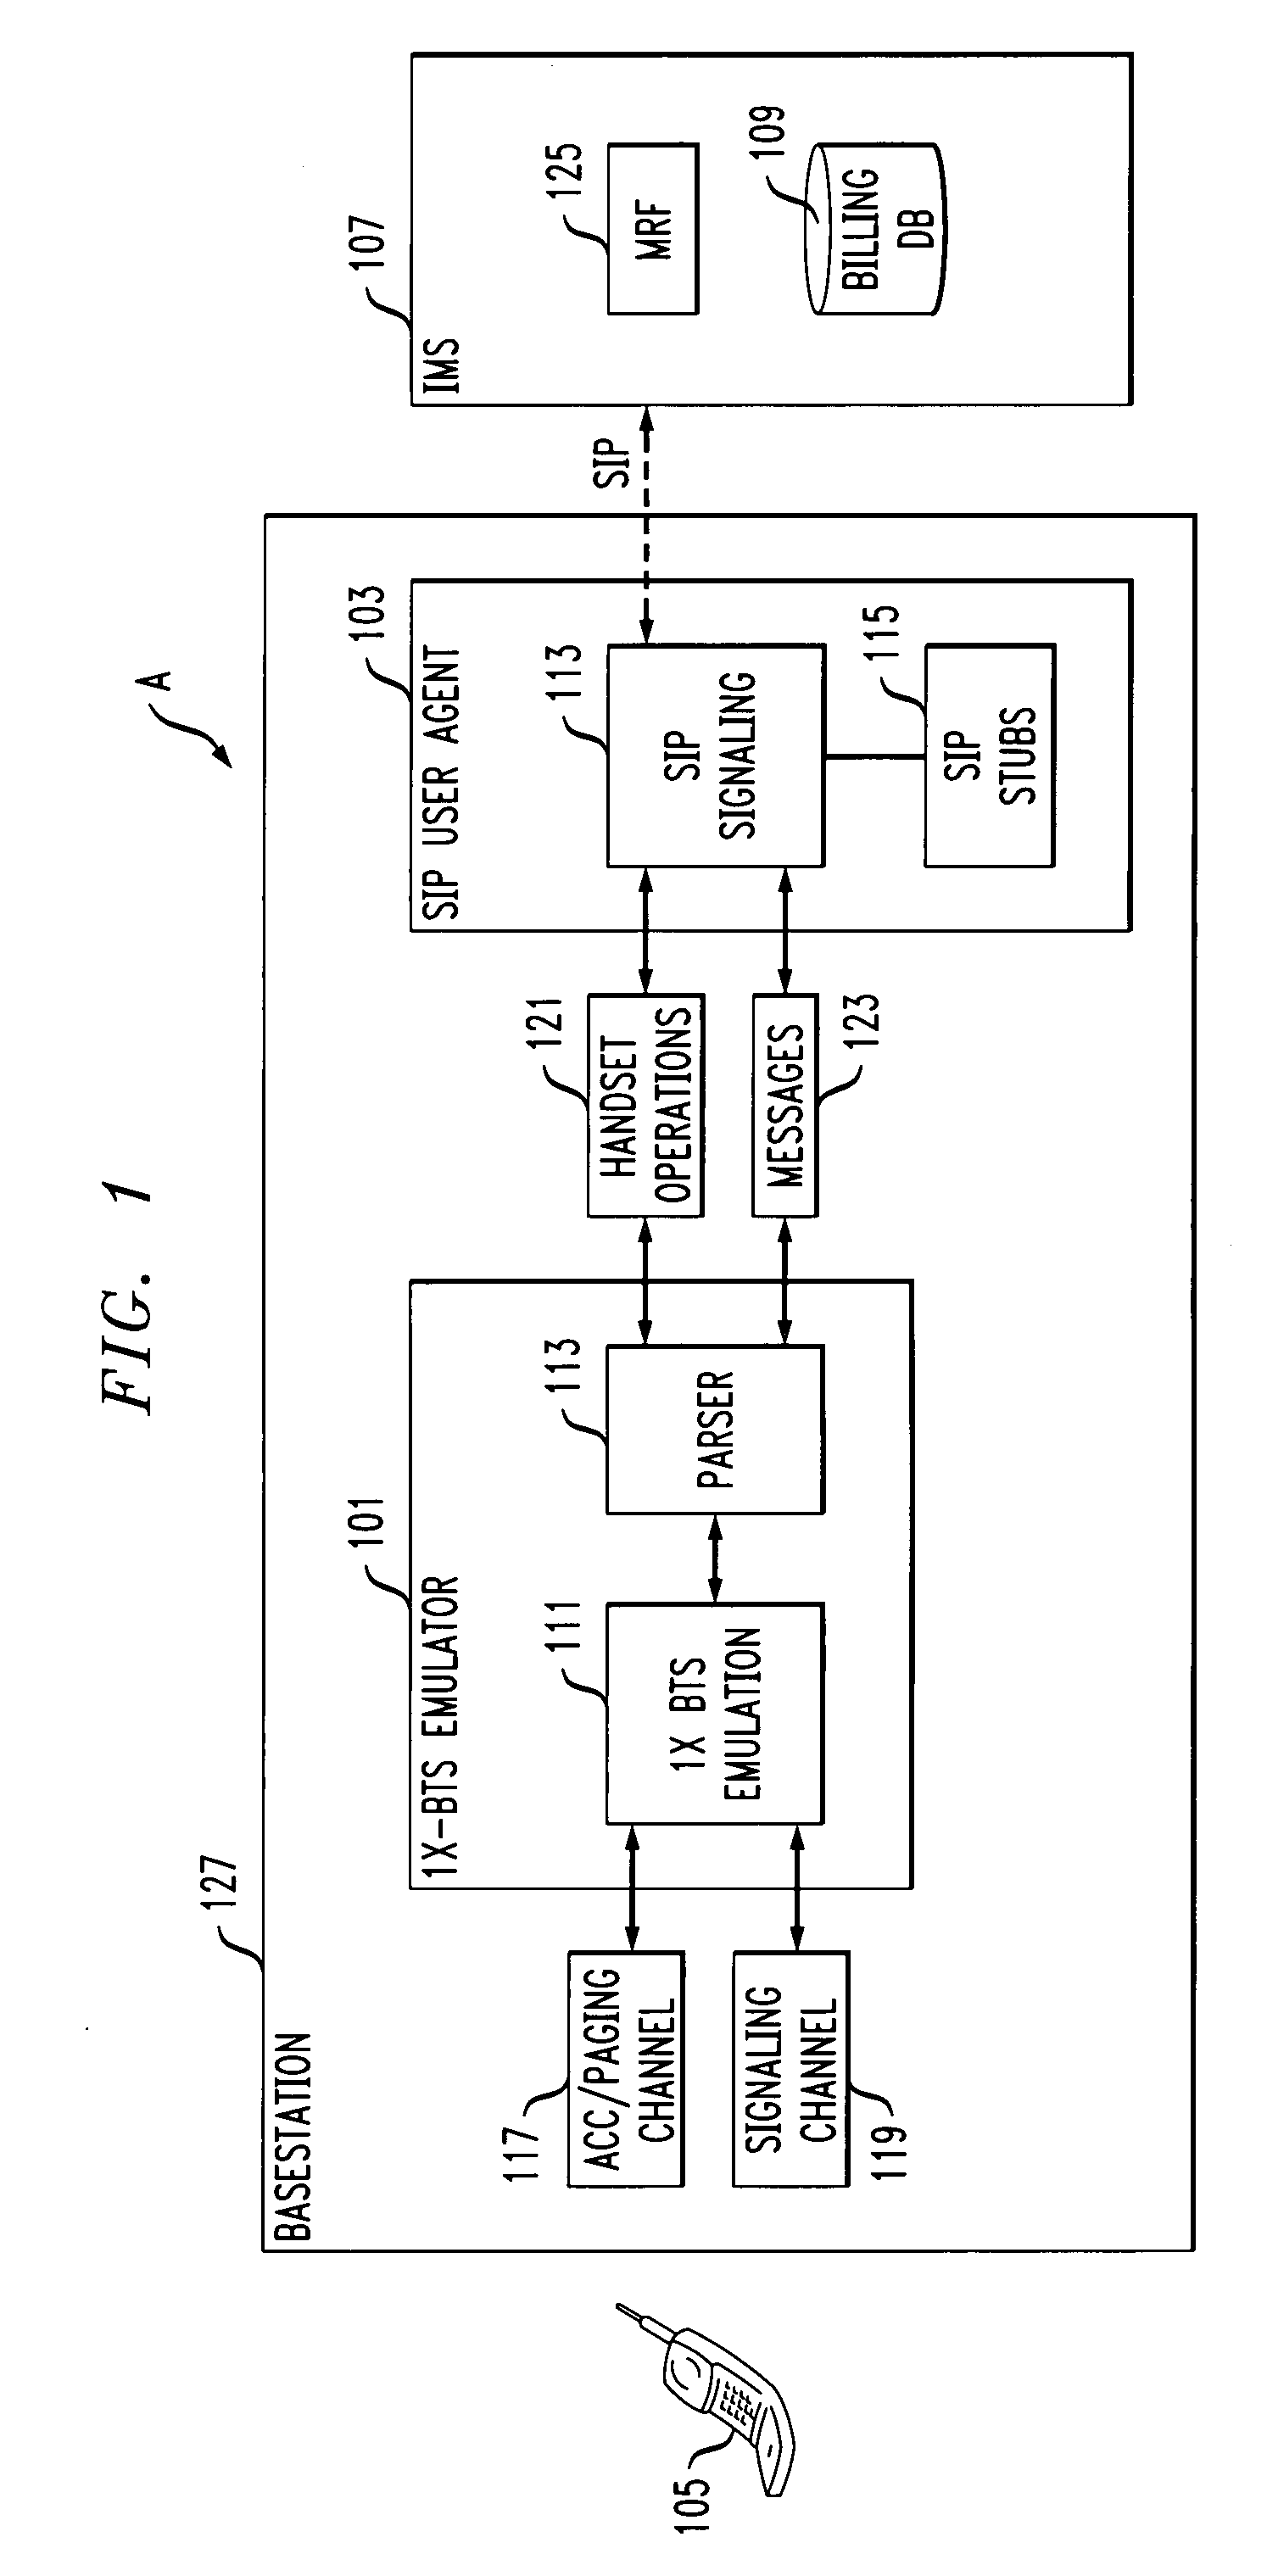 METHOD AND APPARATUS FOR SIGNALING INTERWORKING CDMA 3G1x MOBILES AND EVDO MOBILES WITH AN IMS CORE NETWORK